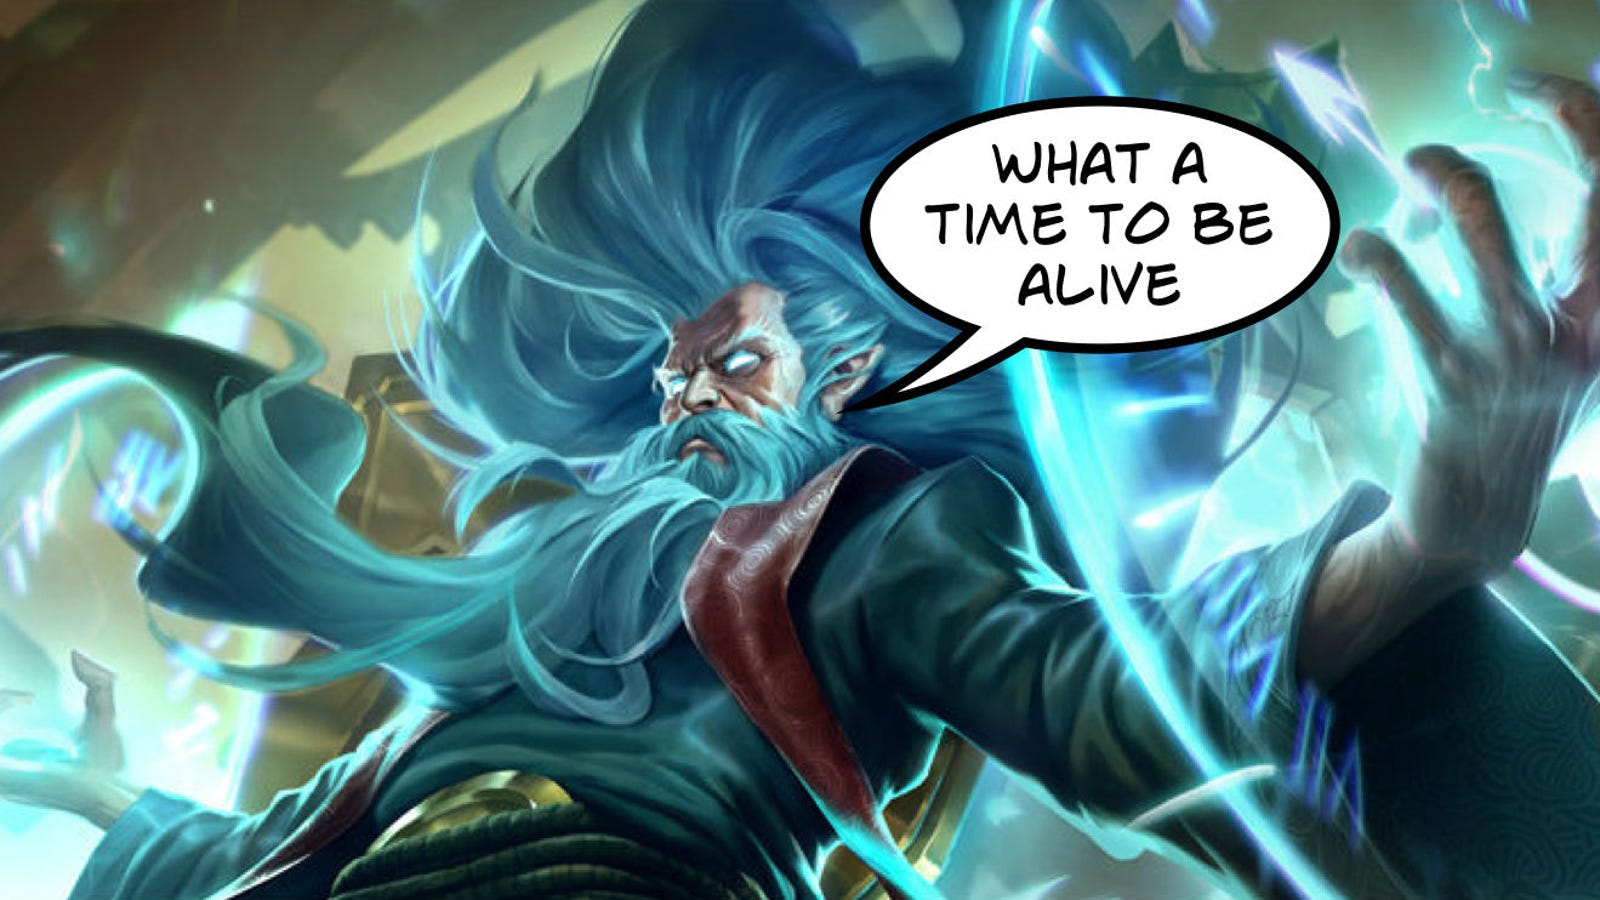 download League Of Legends Zilean,Did You Know That League Of Legends Champ...